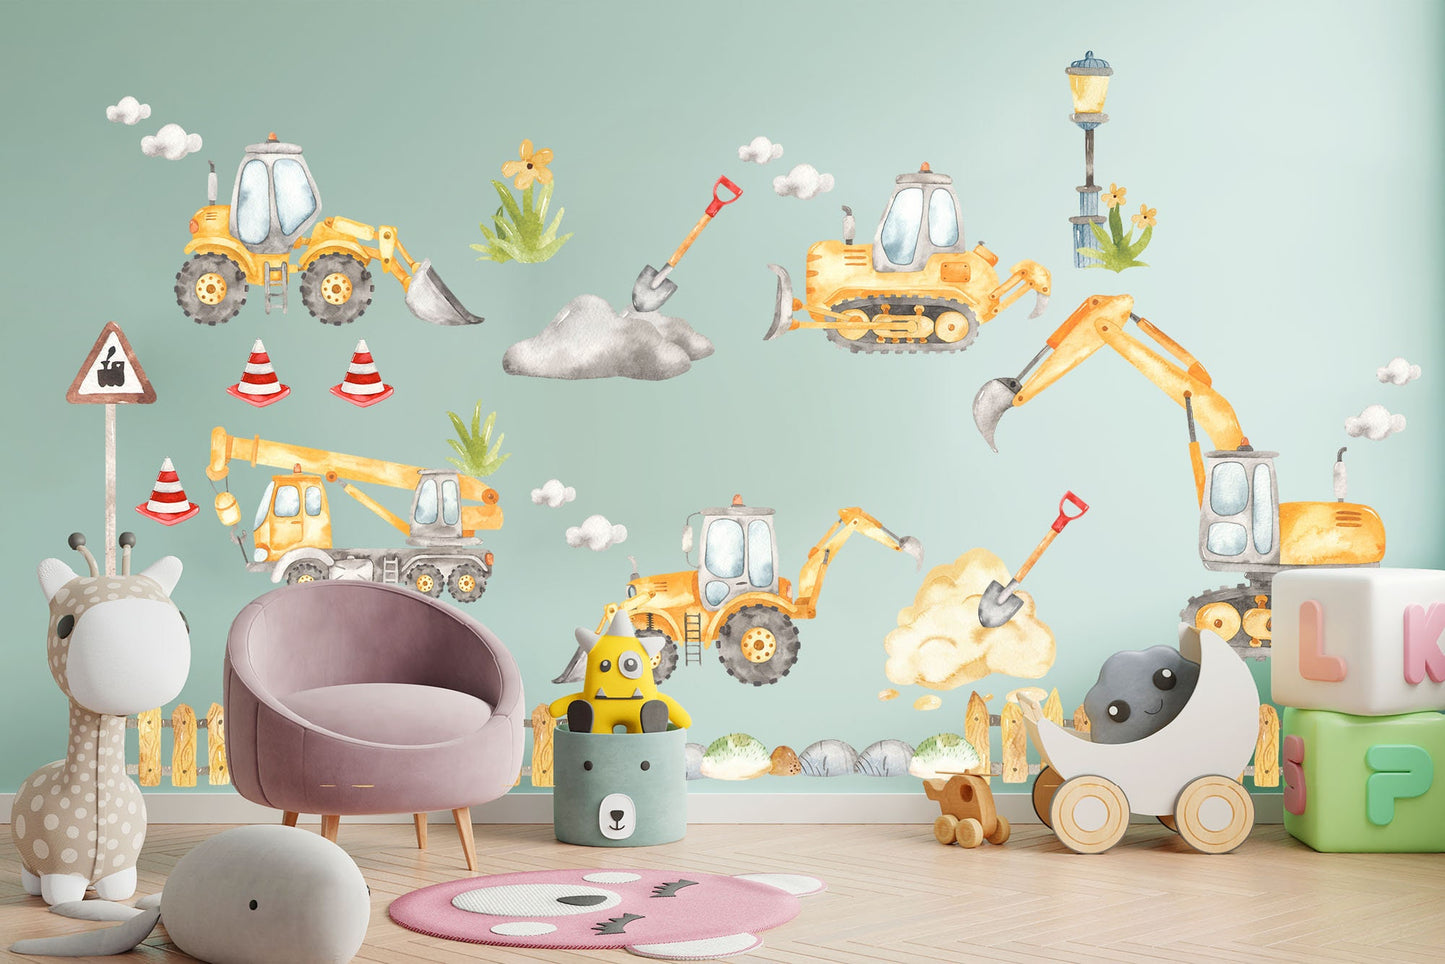 Yellow Construction Machinery Engineering Construction Vehicle Crane Trucks Removable Wall Decal Boys Room Gift - BR187